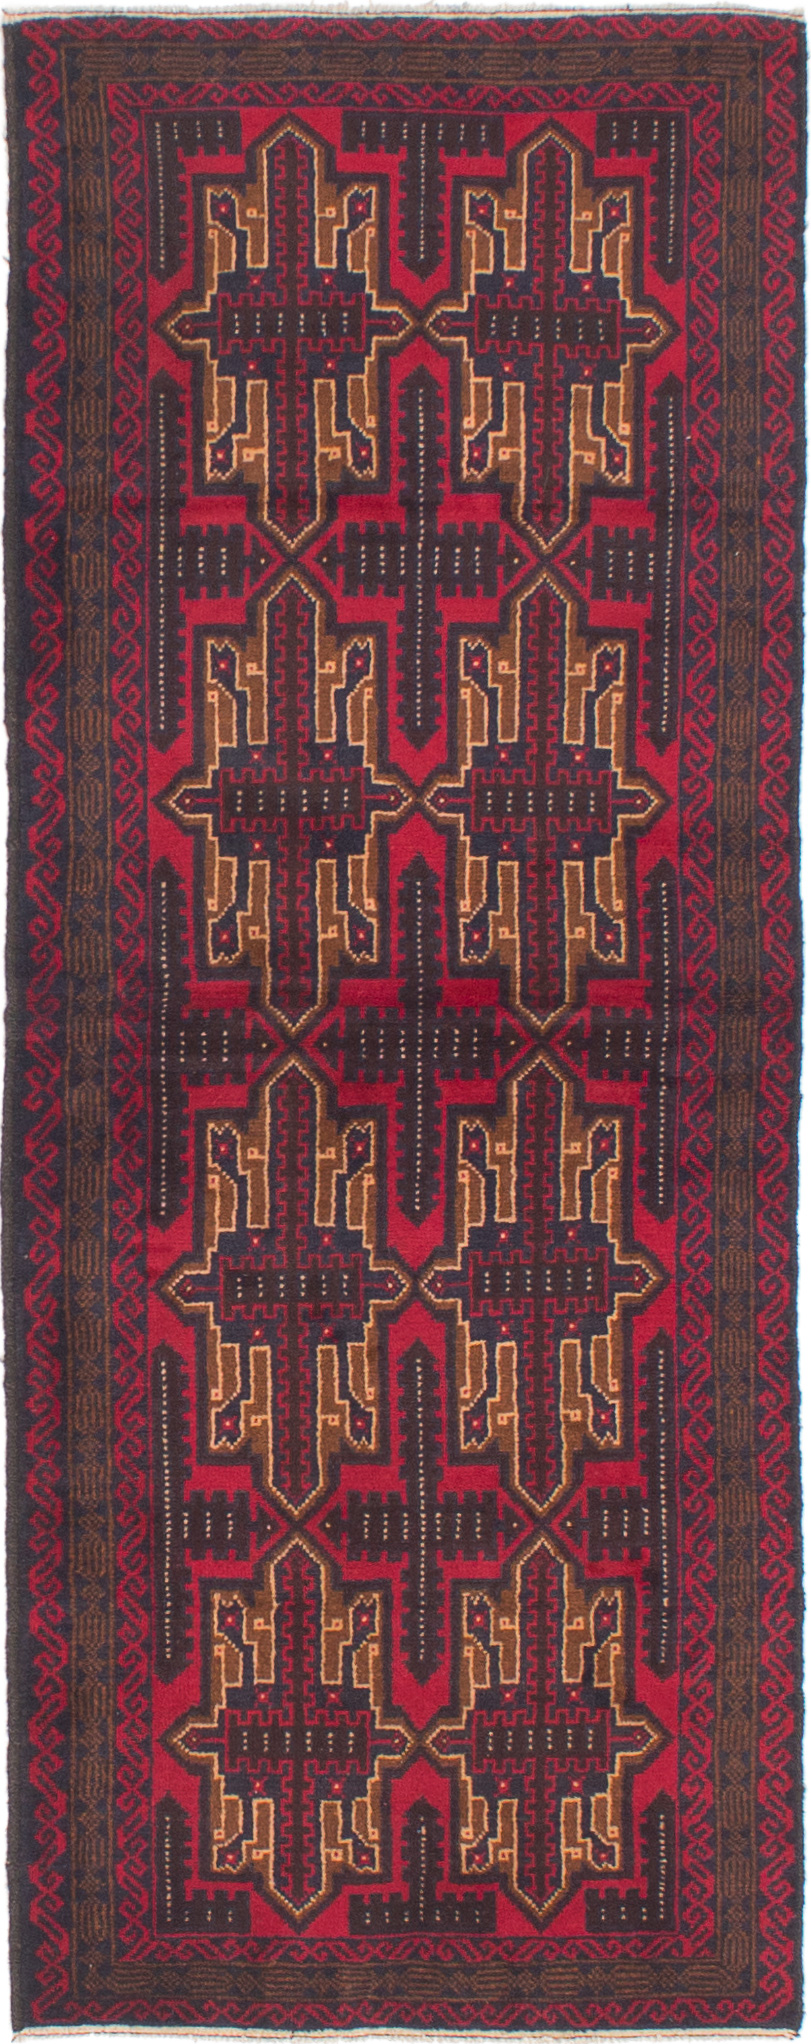 Hand-knotted Teimani Red Wool Rug 2'7" x 6'9" Size: 2'7" x 6'9"  